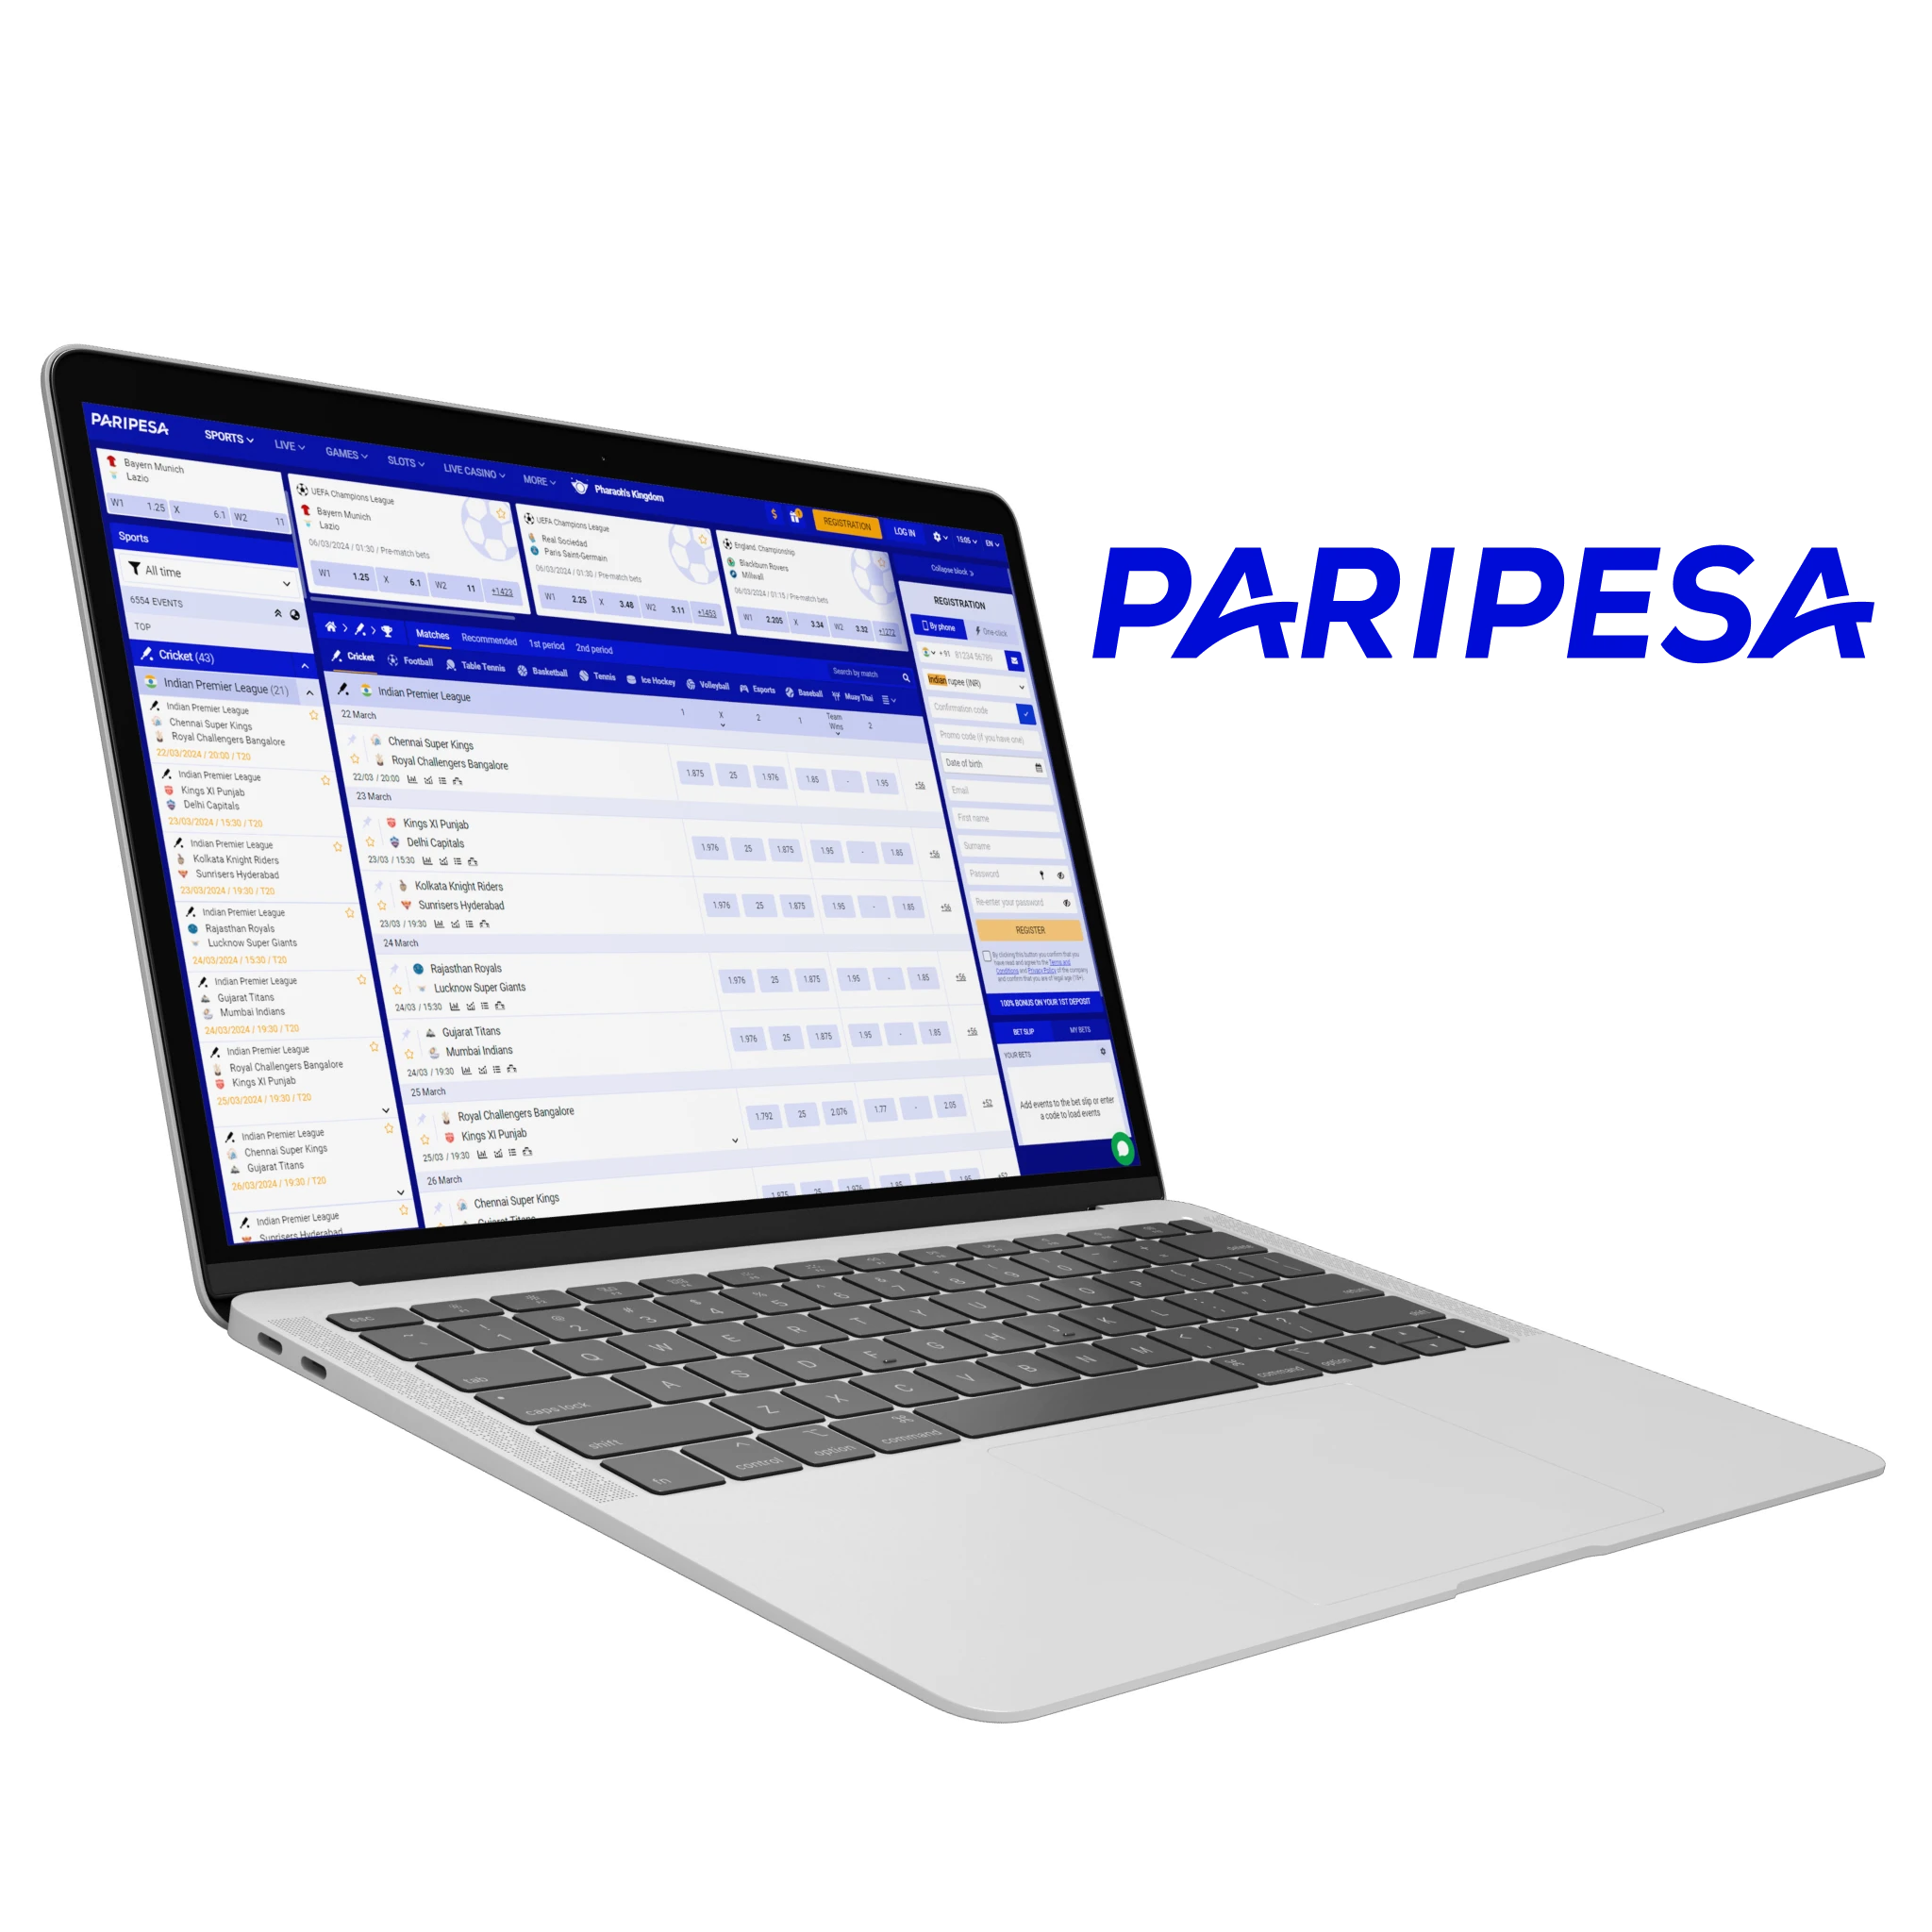 Catering specifically to Indian players, Paripesa offers unparalleled emotions in IPL betting.